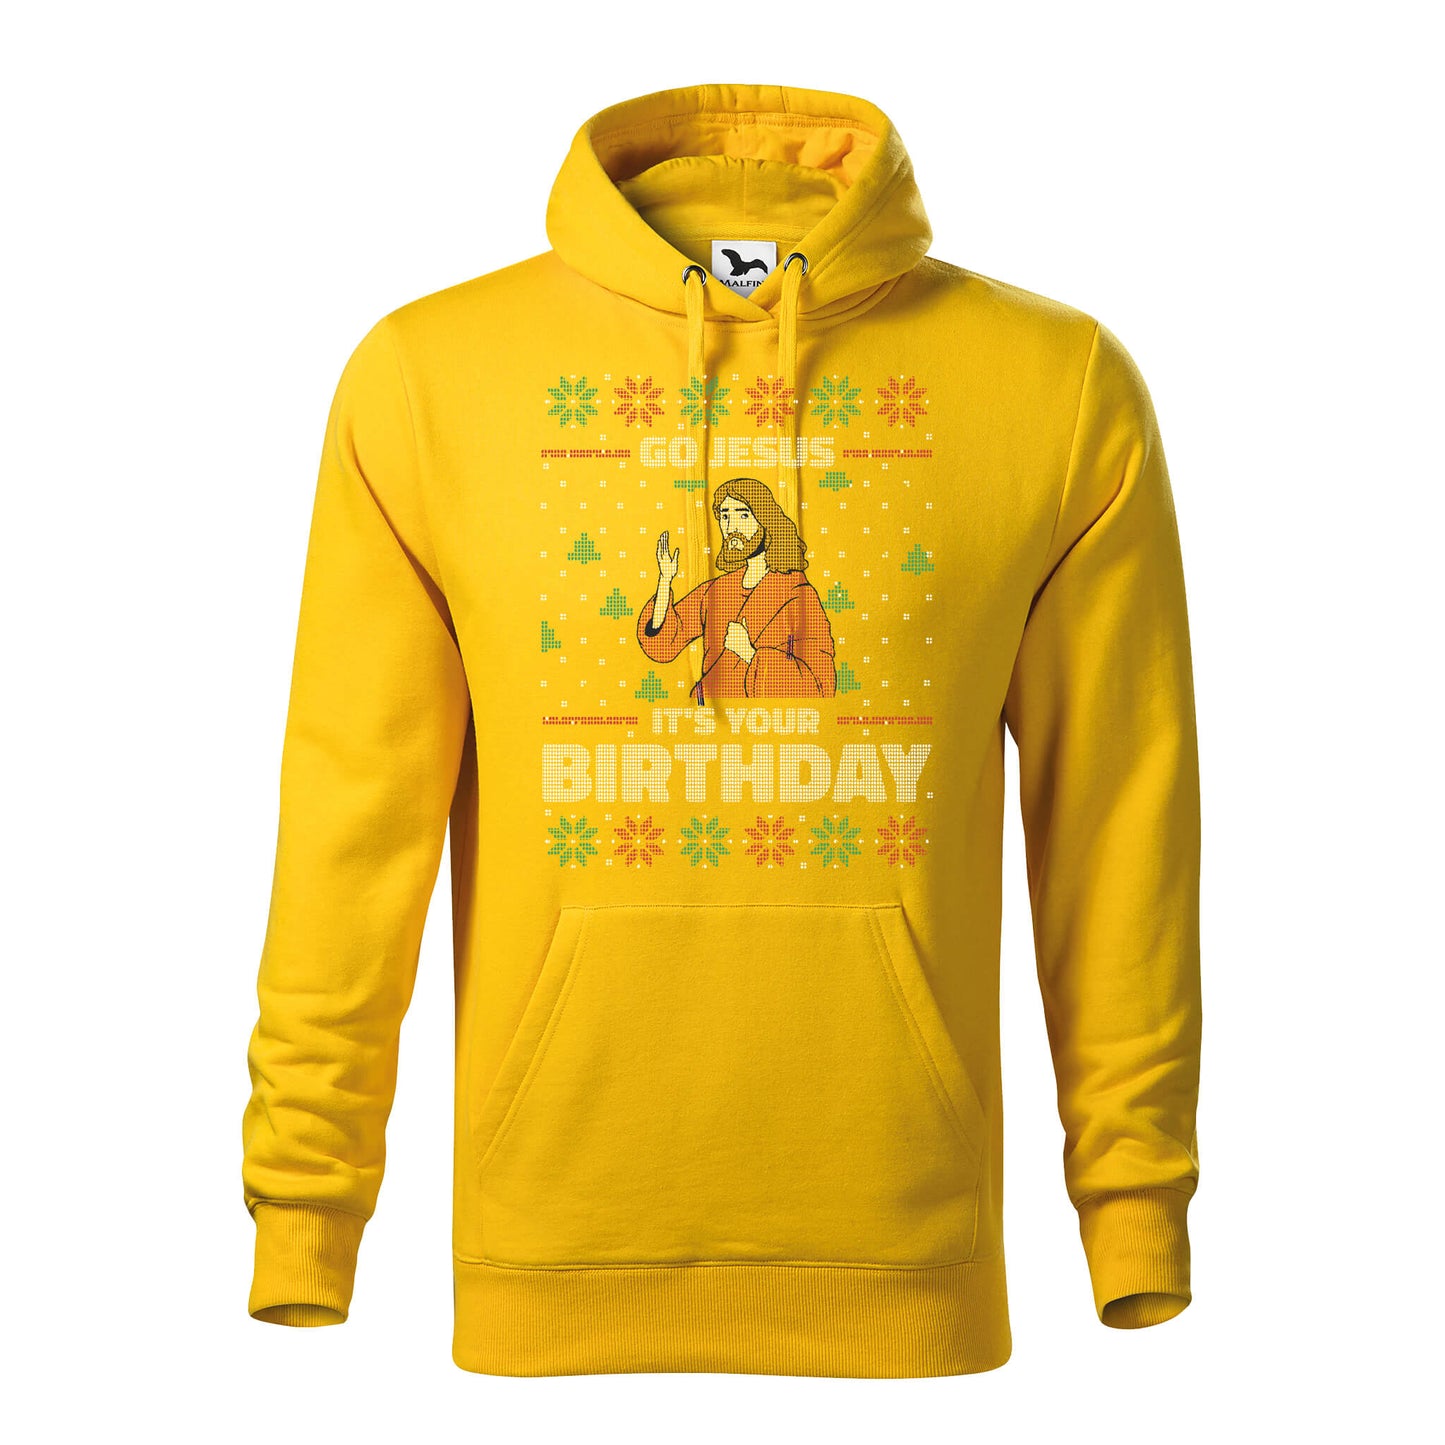 Go jesus its your birthday ugly hoodie - rvdesignprint